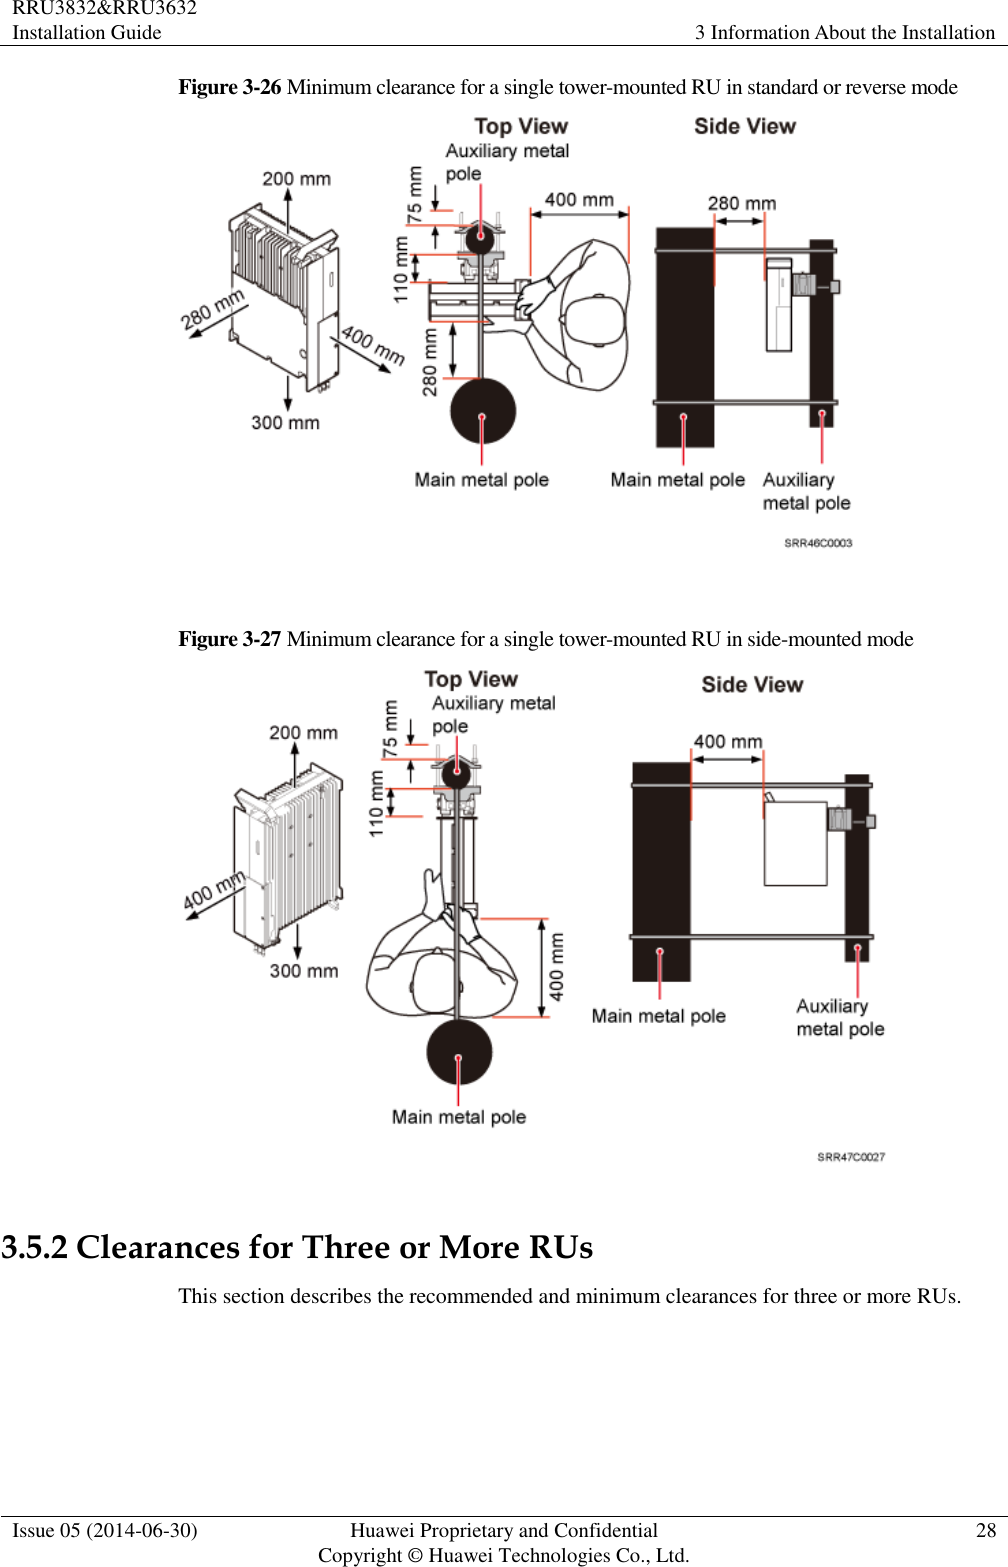 RRU3832&amp;RRU3632 Installation Guide 3 Information About the Installation  Issue 05 (2014-06-30) Huawei Proprietary and Confidential                                     Copyright © Huawei Technologies Co., Ltd. 28  Figure 3-26 Minimum clearance for a single tower-mounted RU in standard or reverse mode   Figure 3-27 Minimum clearance for a single tower-mounted RU in side-mounted mode   3.5.2 Clearances for Three or More RUs This section describes the recommended and minimum clearances for three or more RUs.  